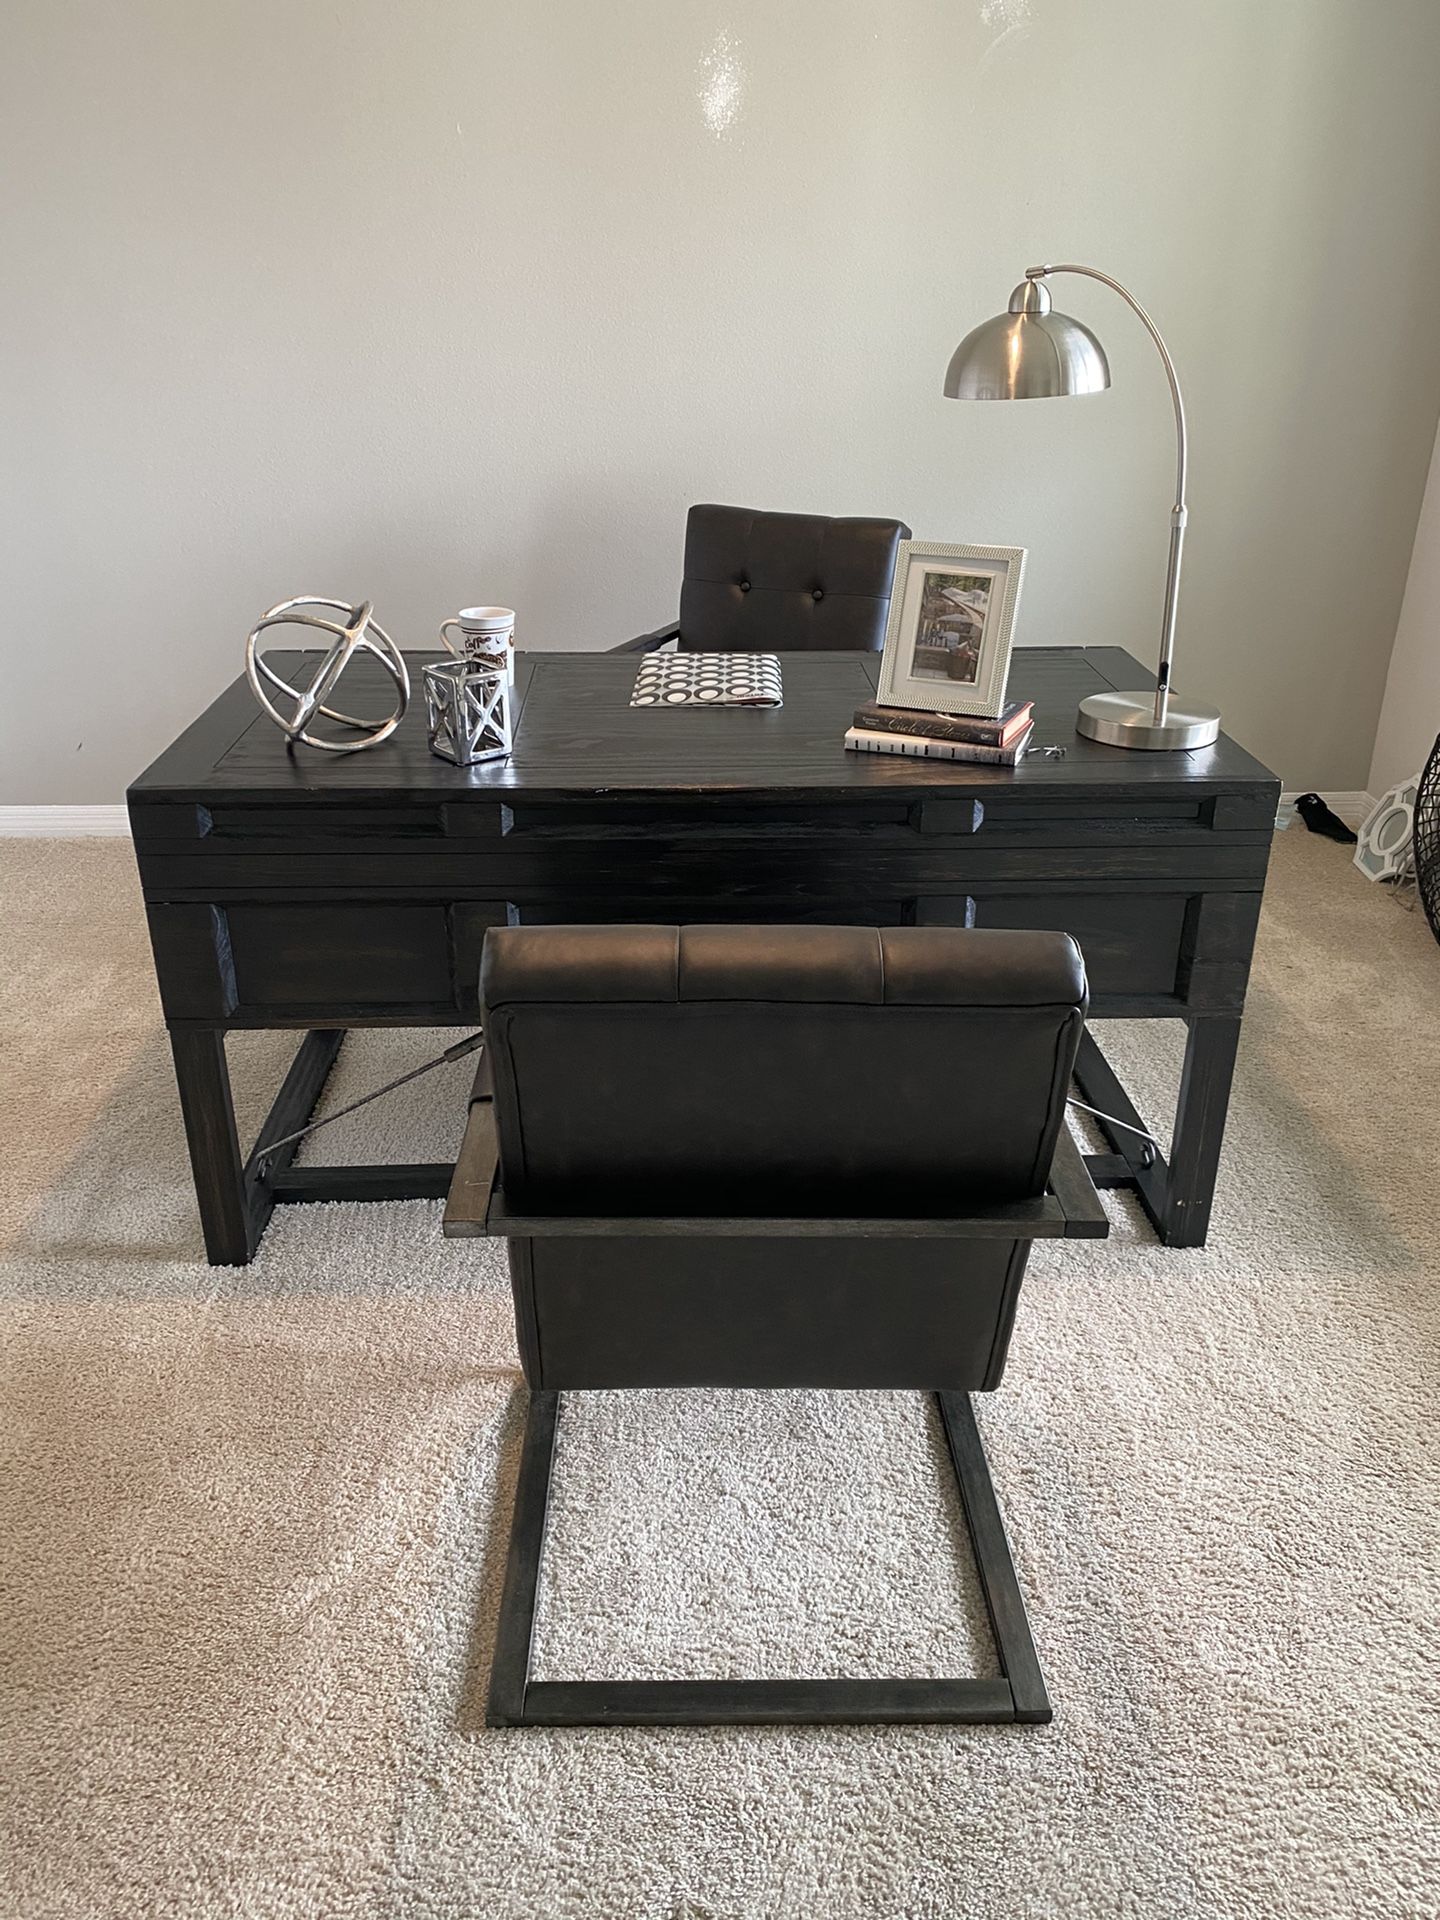 Desk w/ 2 Chairs - Used Only For Staging Purposes To Sell a House